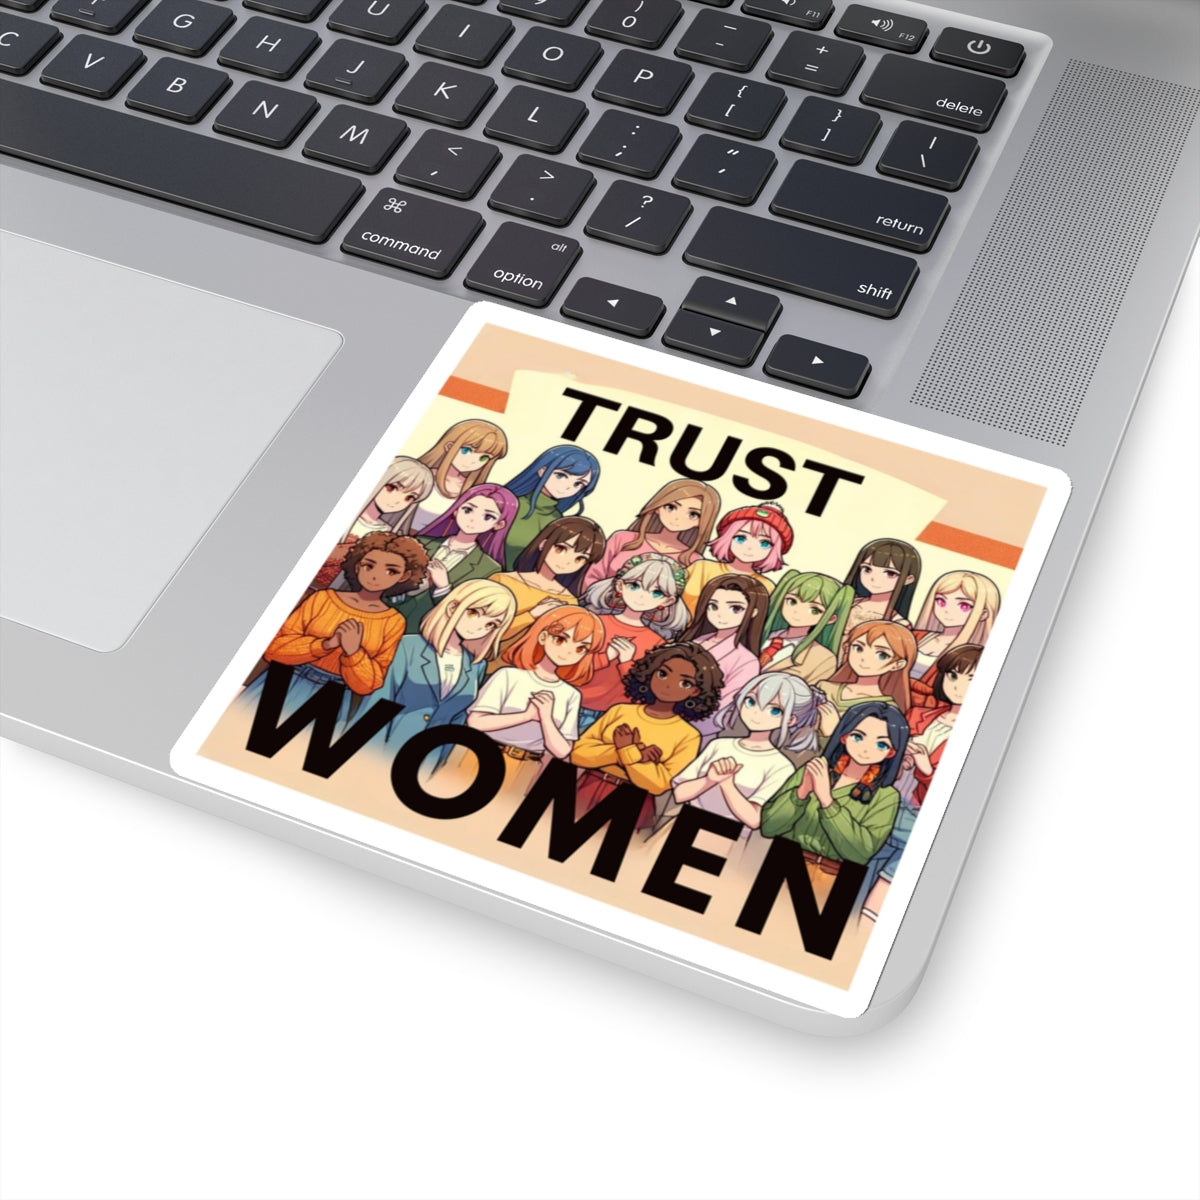 Trust Women! Say it Loud and say it Proud! Statement Sticker